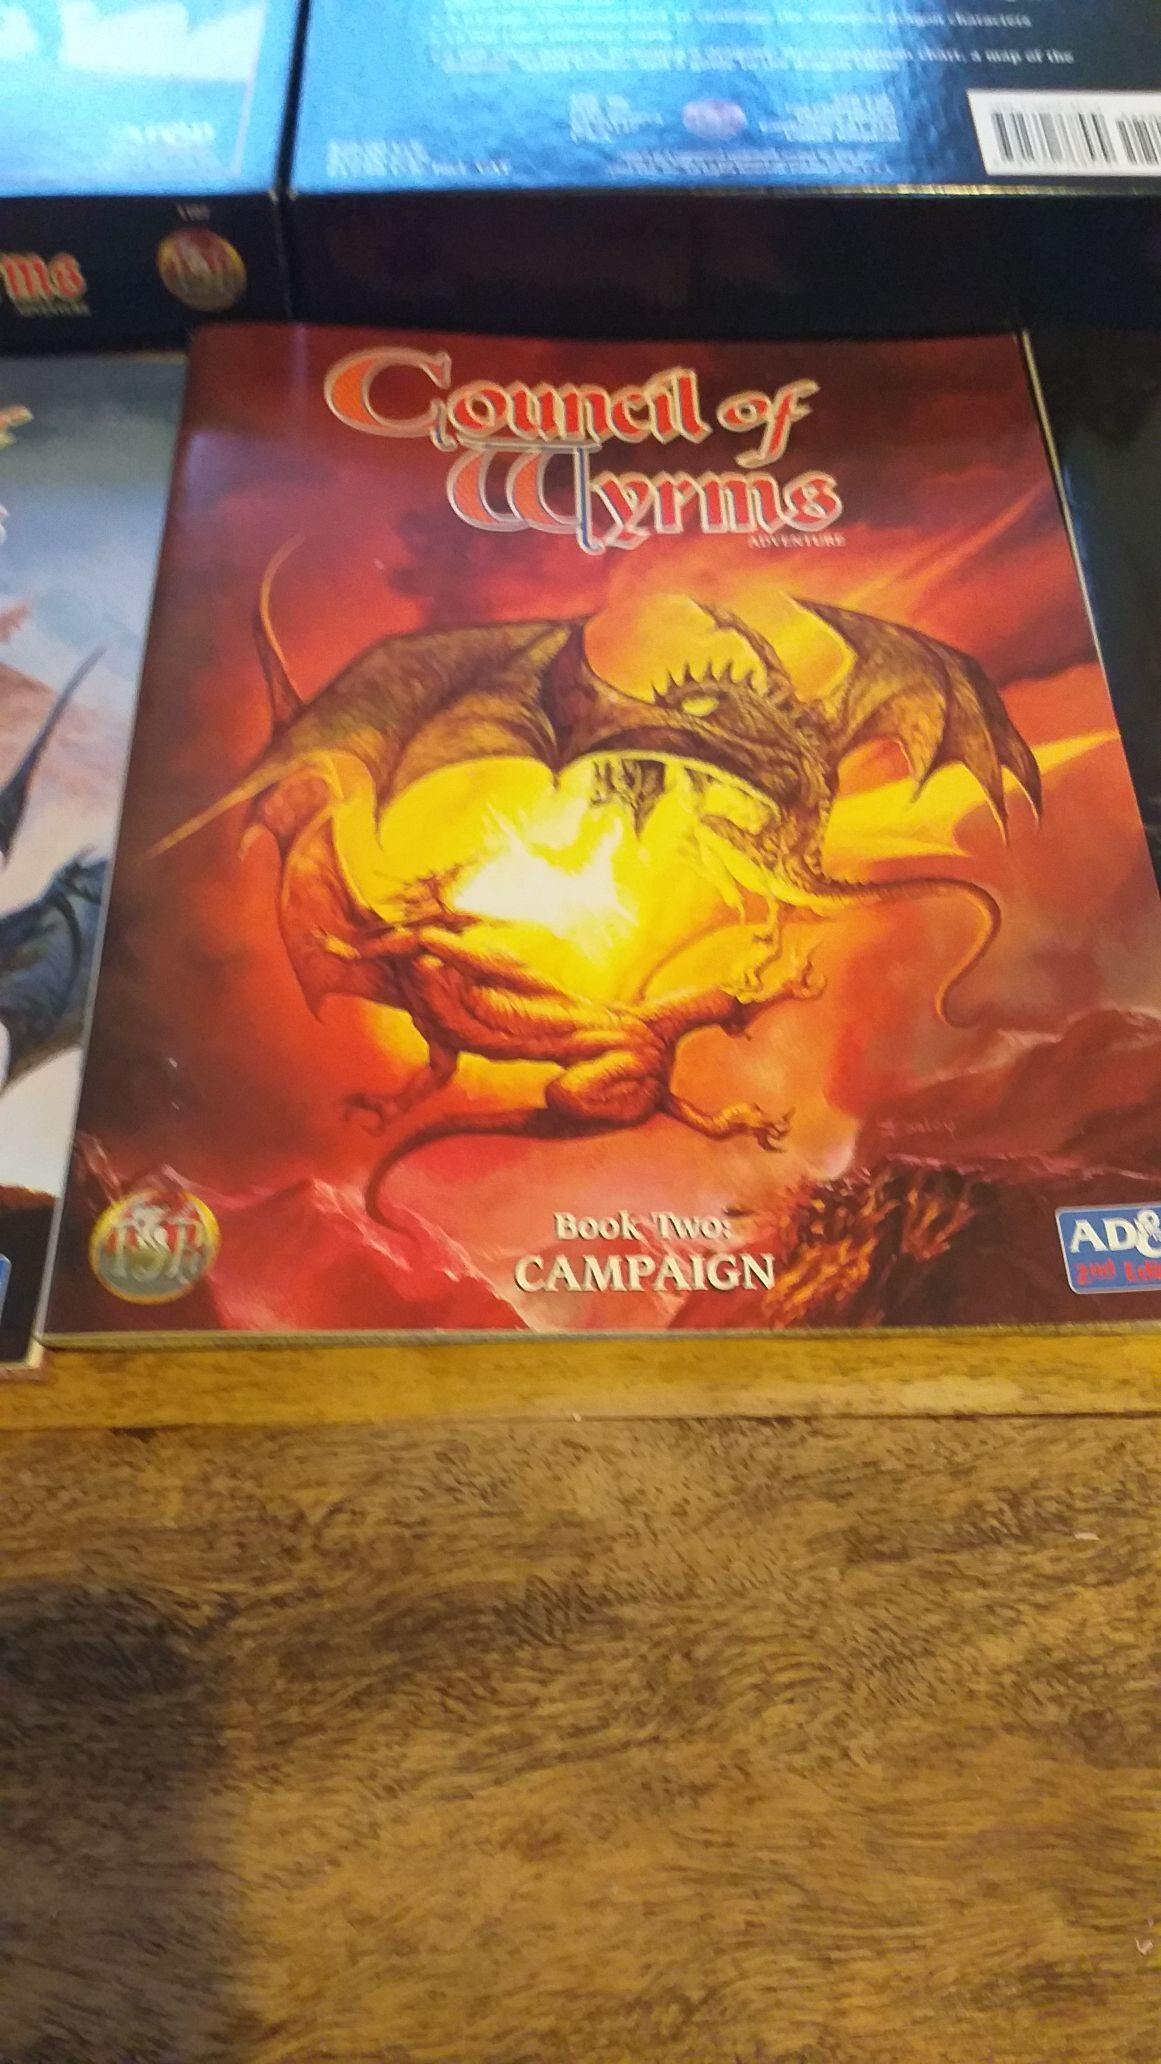 Council of Wyrms AD&D 2Ed Fantasy Roleplaying Box - 3 books - 3 maps - 12RefCards - AllRoleplaying.com